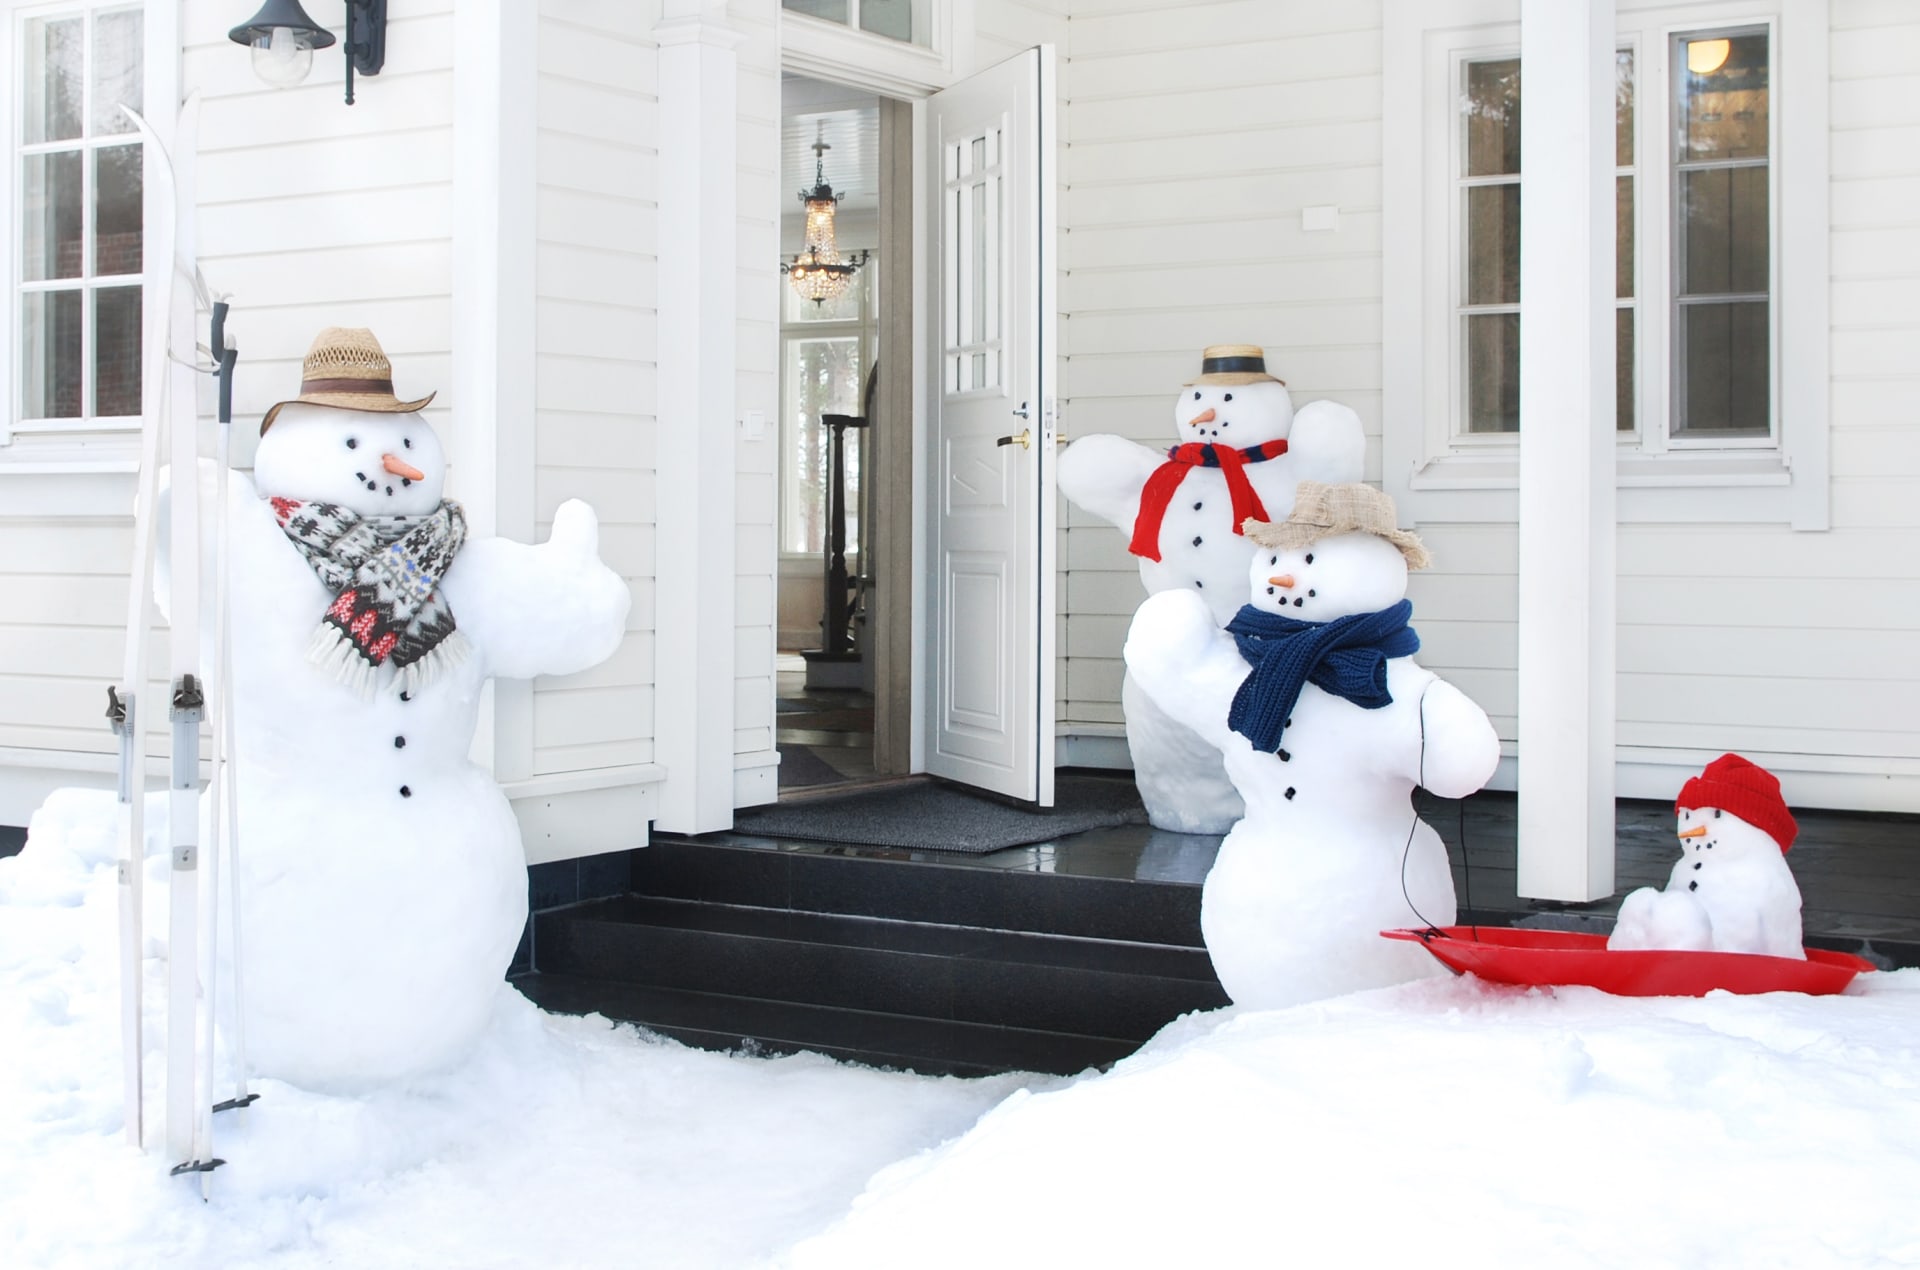 The hosting snowfamily warmly welcomes you to Villa Cone Beach.